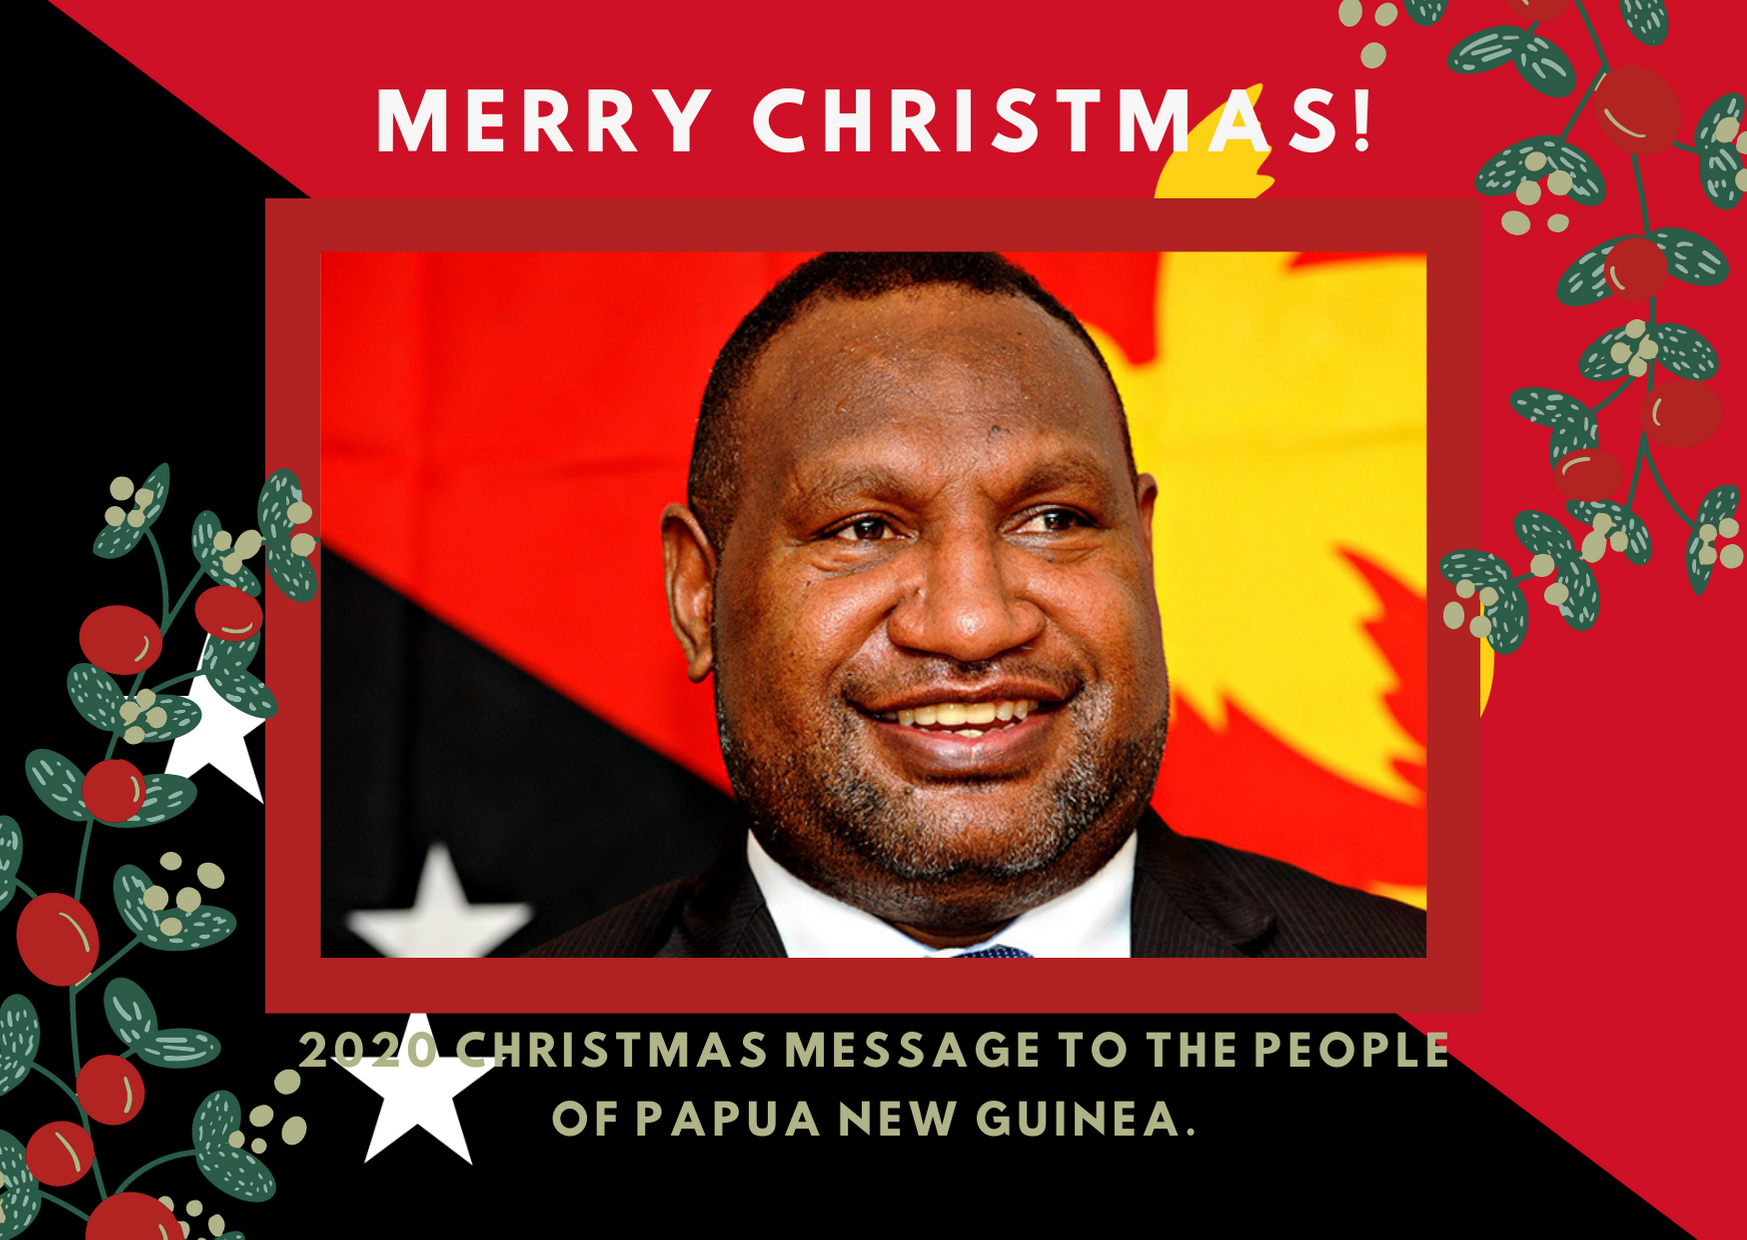 PMJM: 2020 CHRISTMAS MESSAGE TO THE PEOPLE OF PAPUA NEW GUINEA﻿﻿.